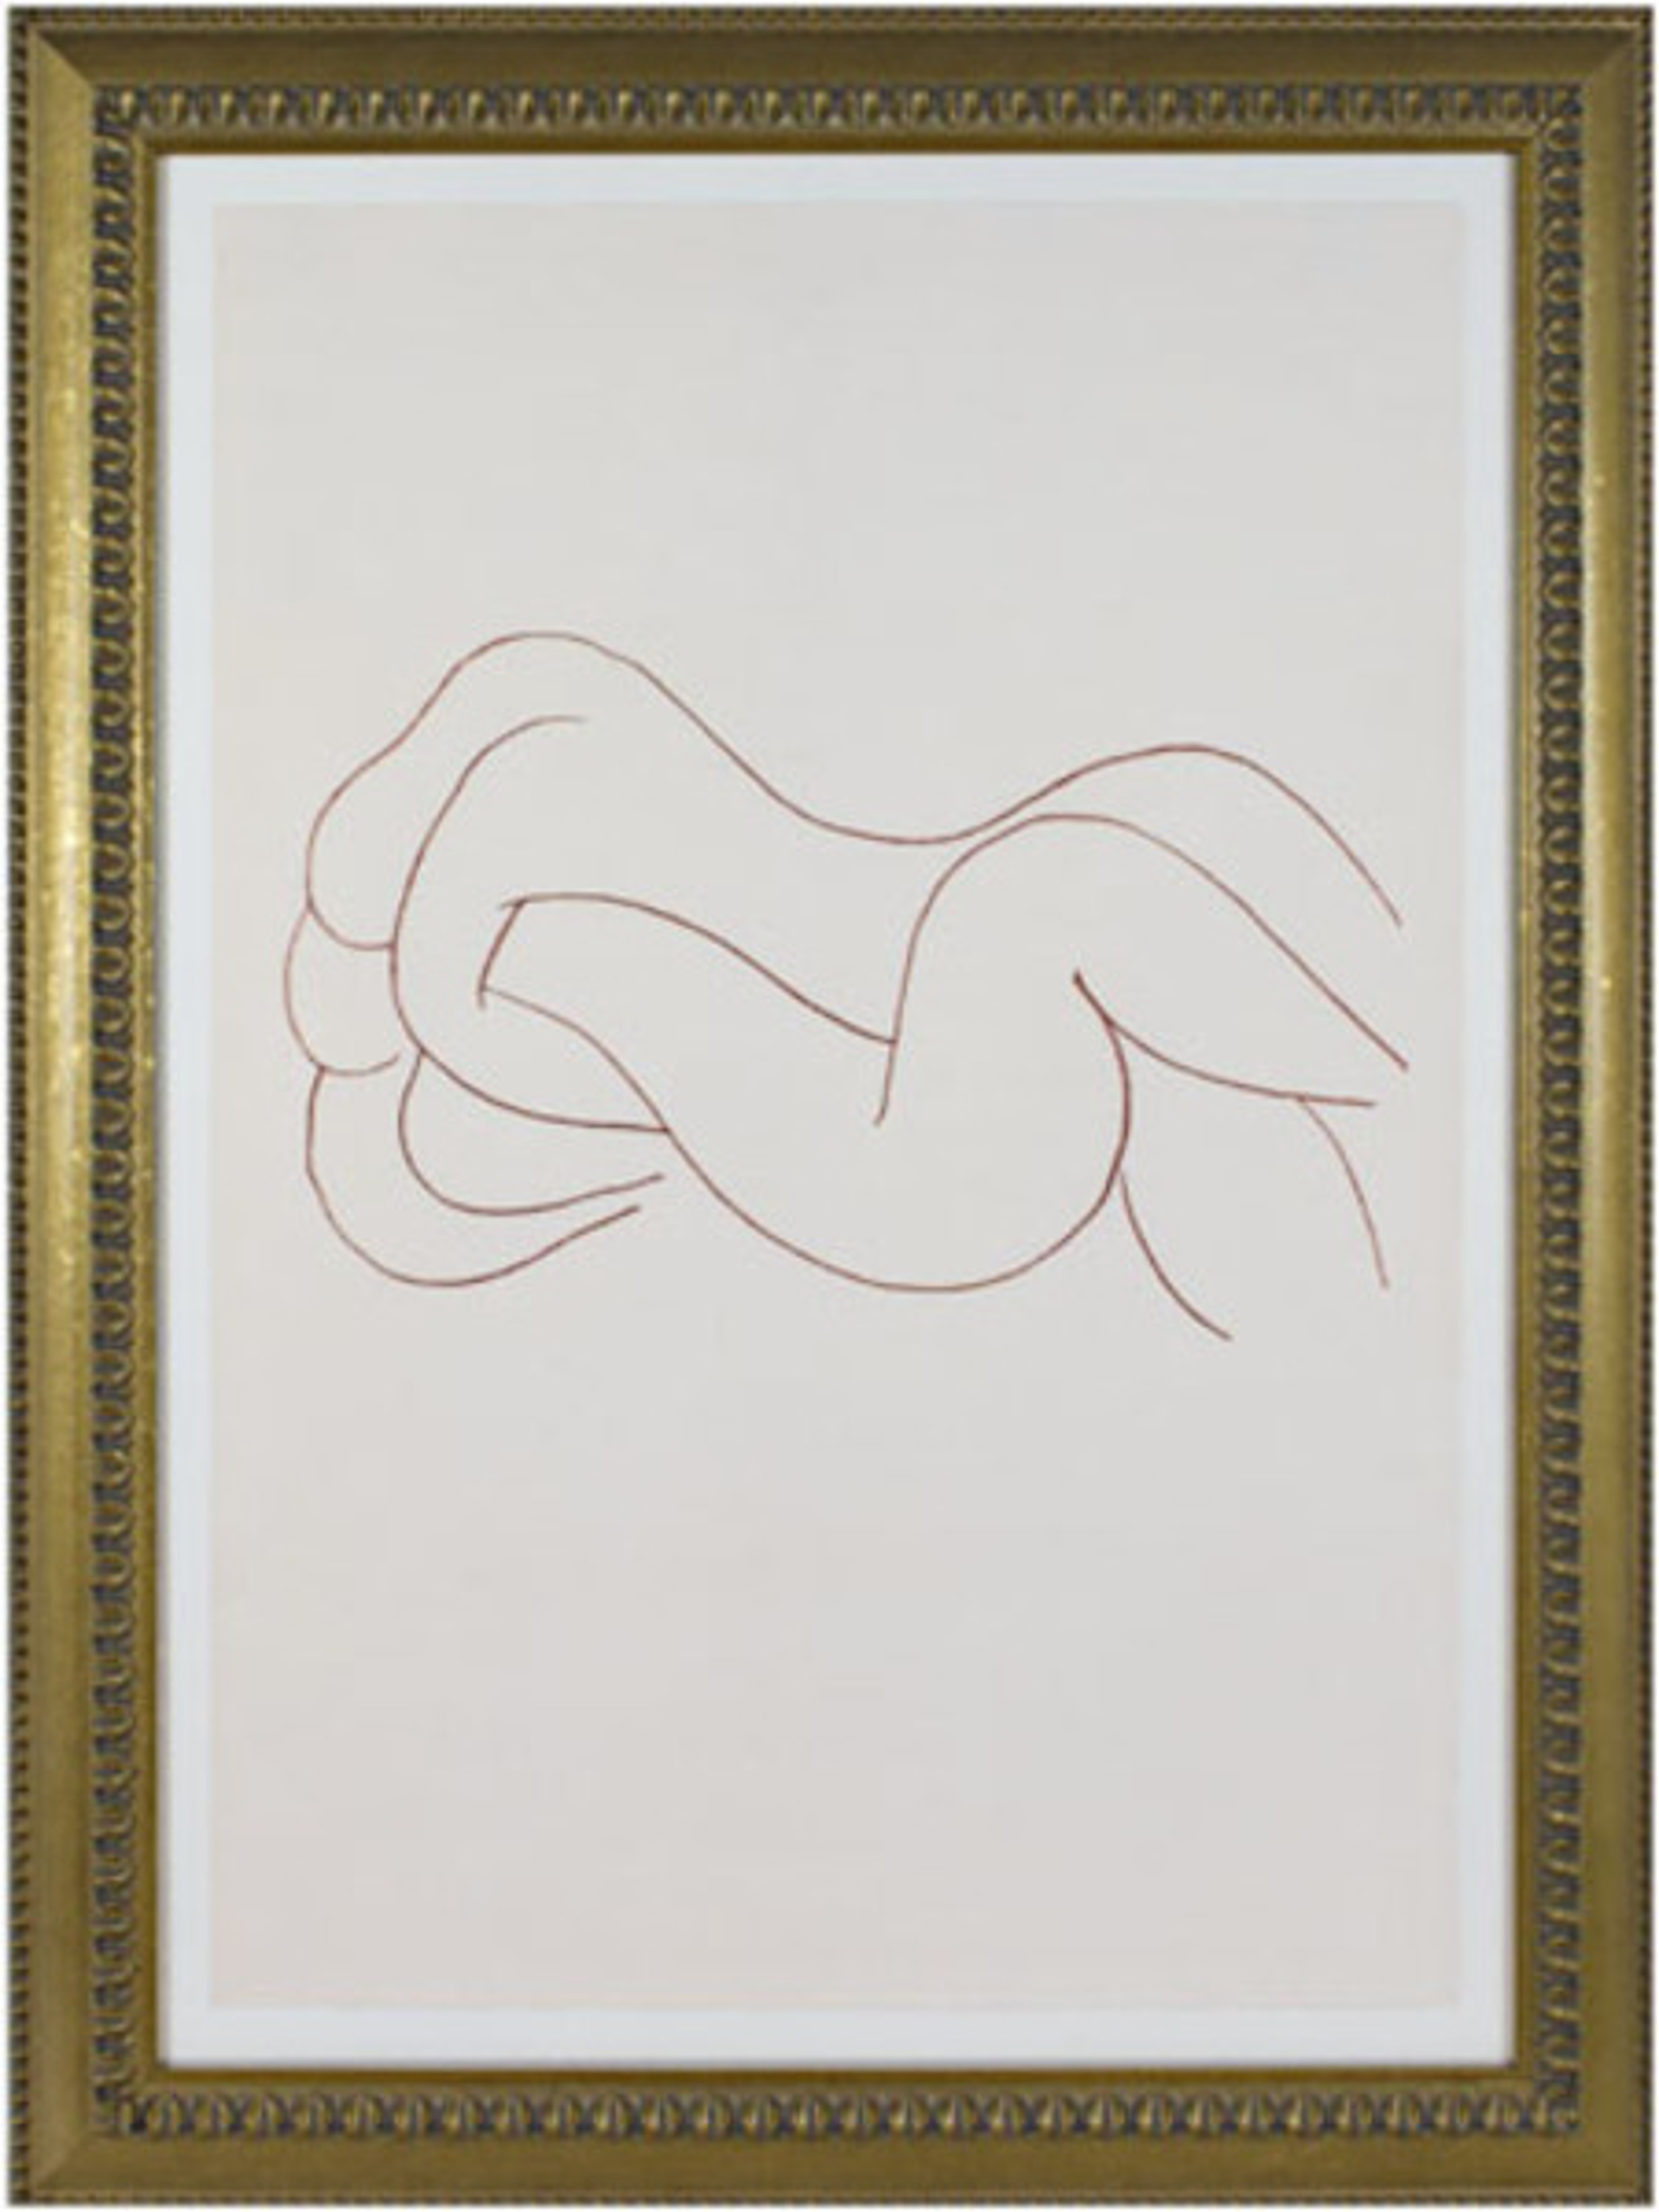 Two Nudes Entwined (from Florilege des Amours de Ronsard Portfolio) by Henri Matisse